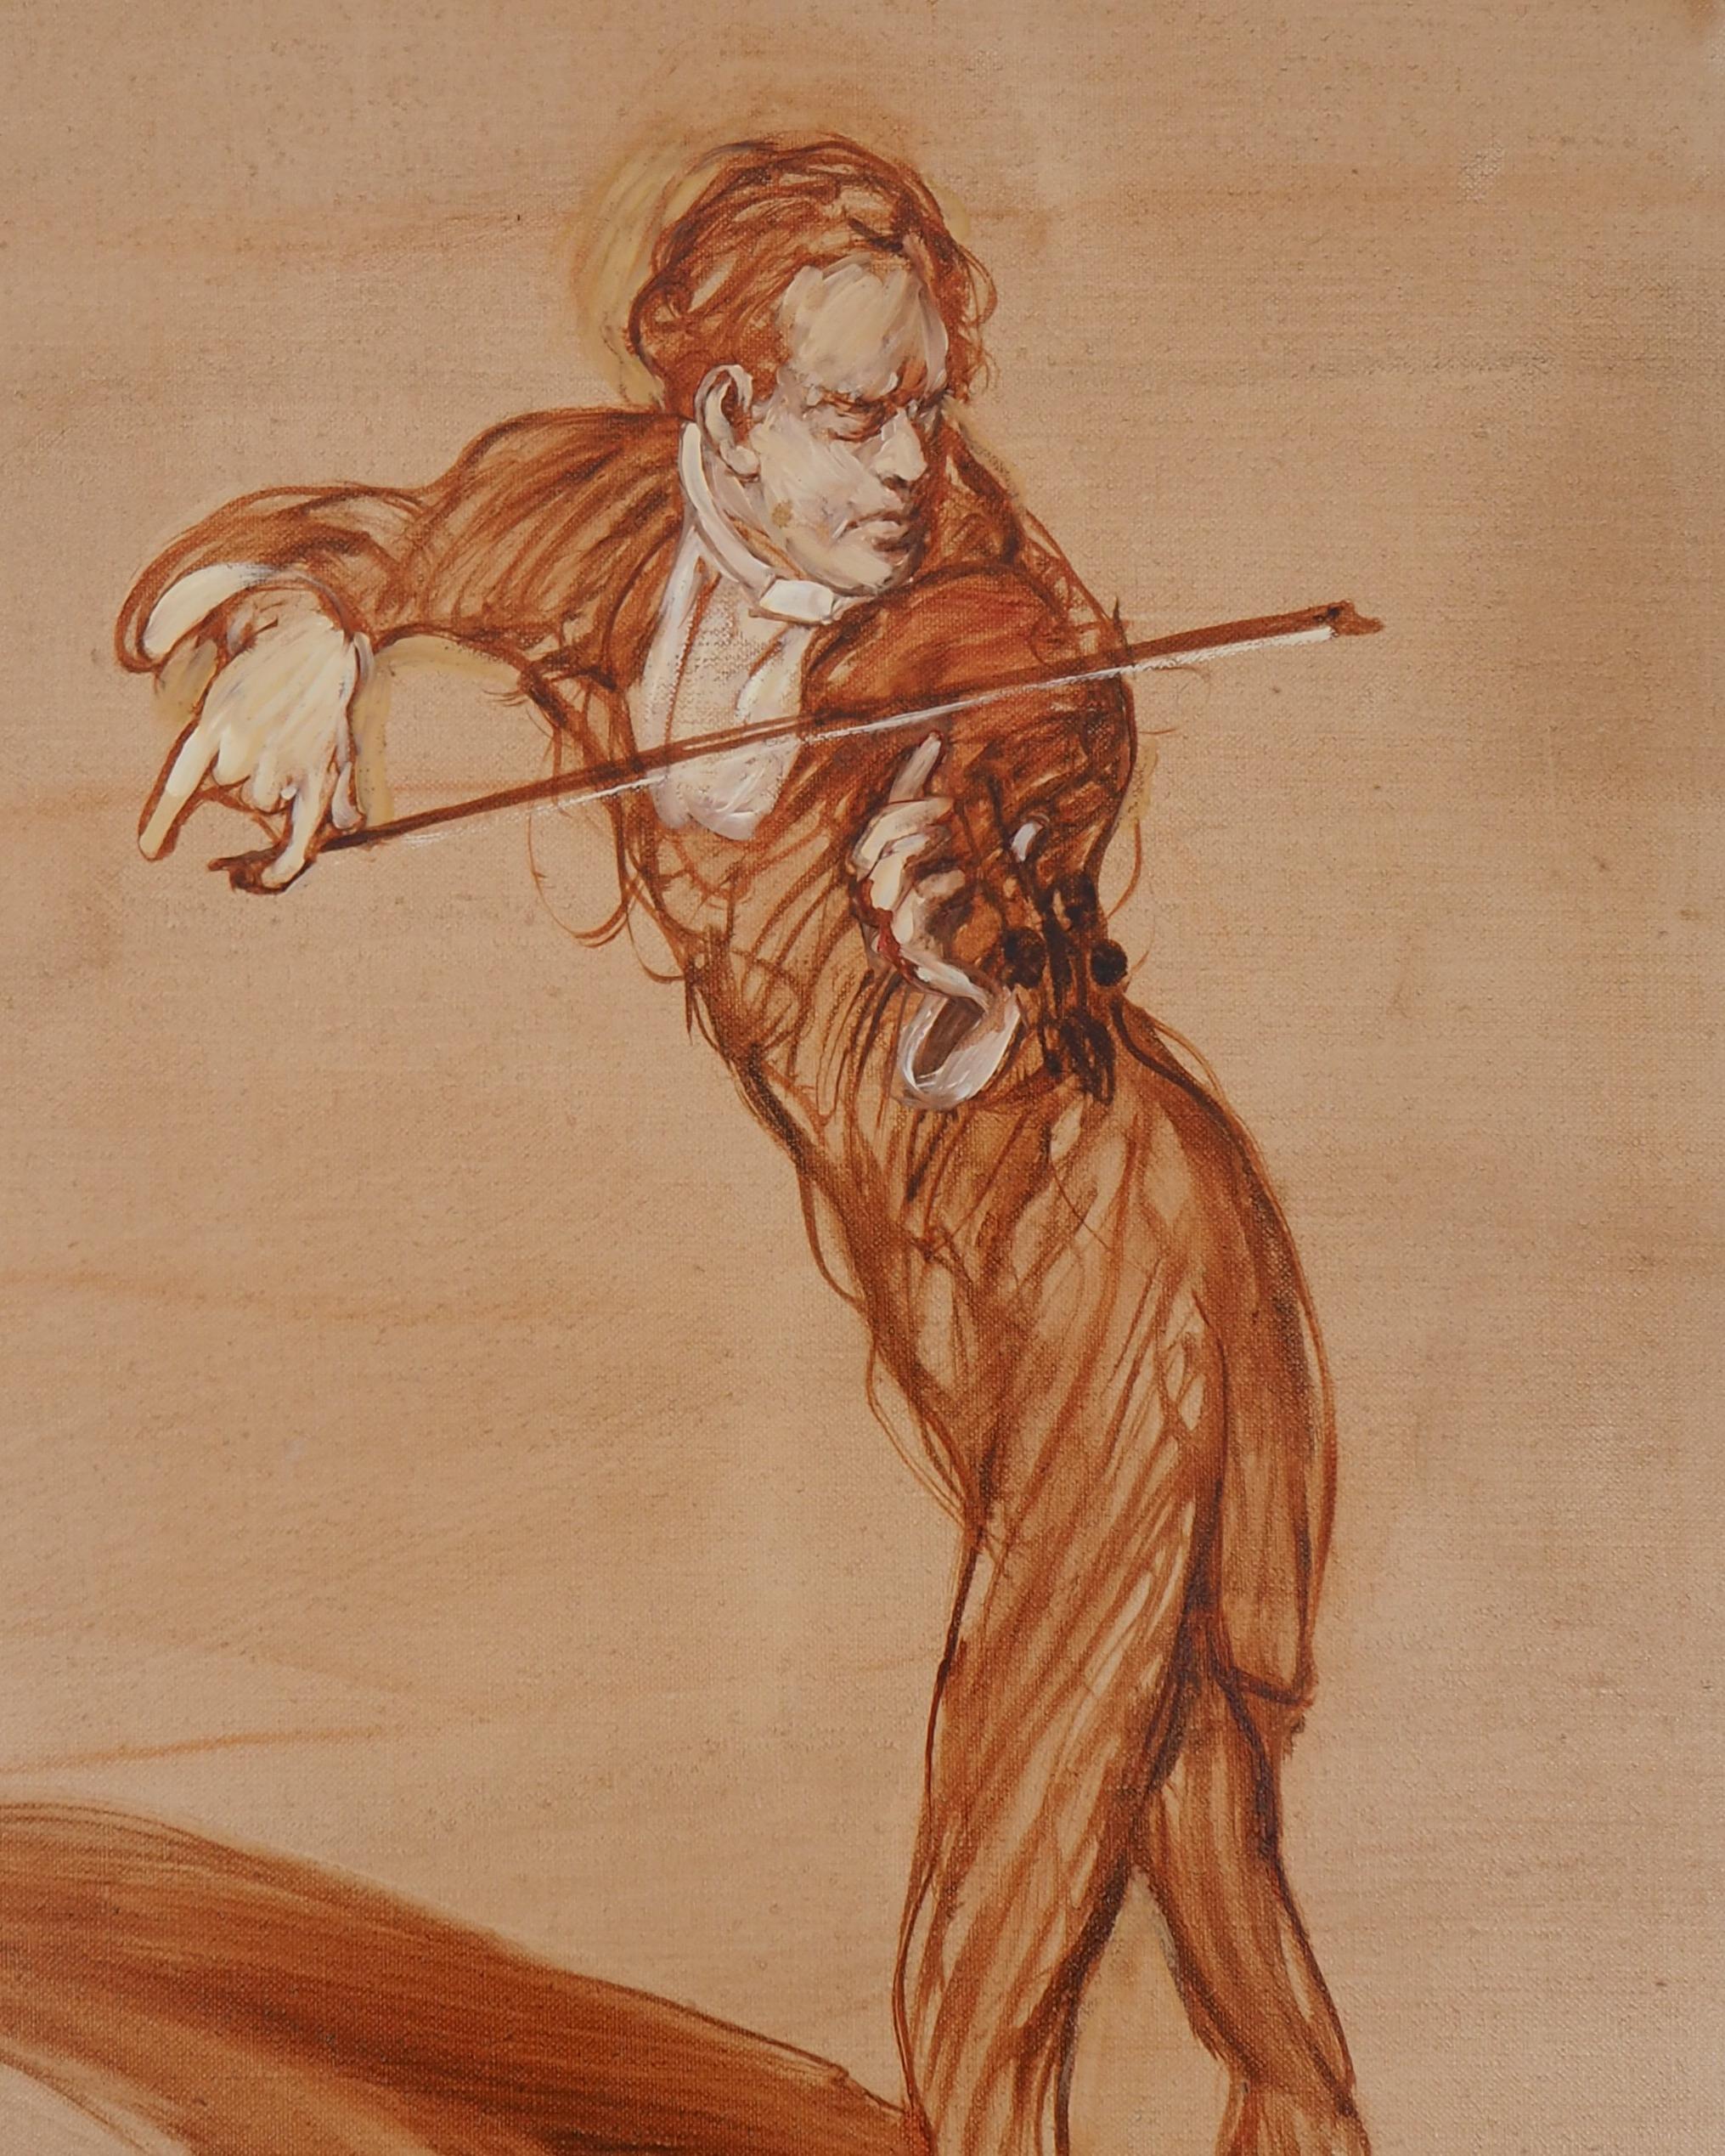 Violin : The Soloist - Original Oil on Canvas, Signed - Brown Figurative Painting by Claude Weisbuch